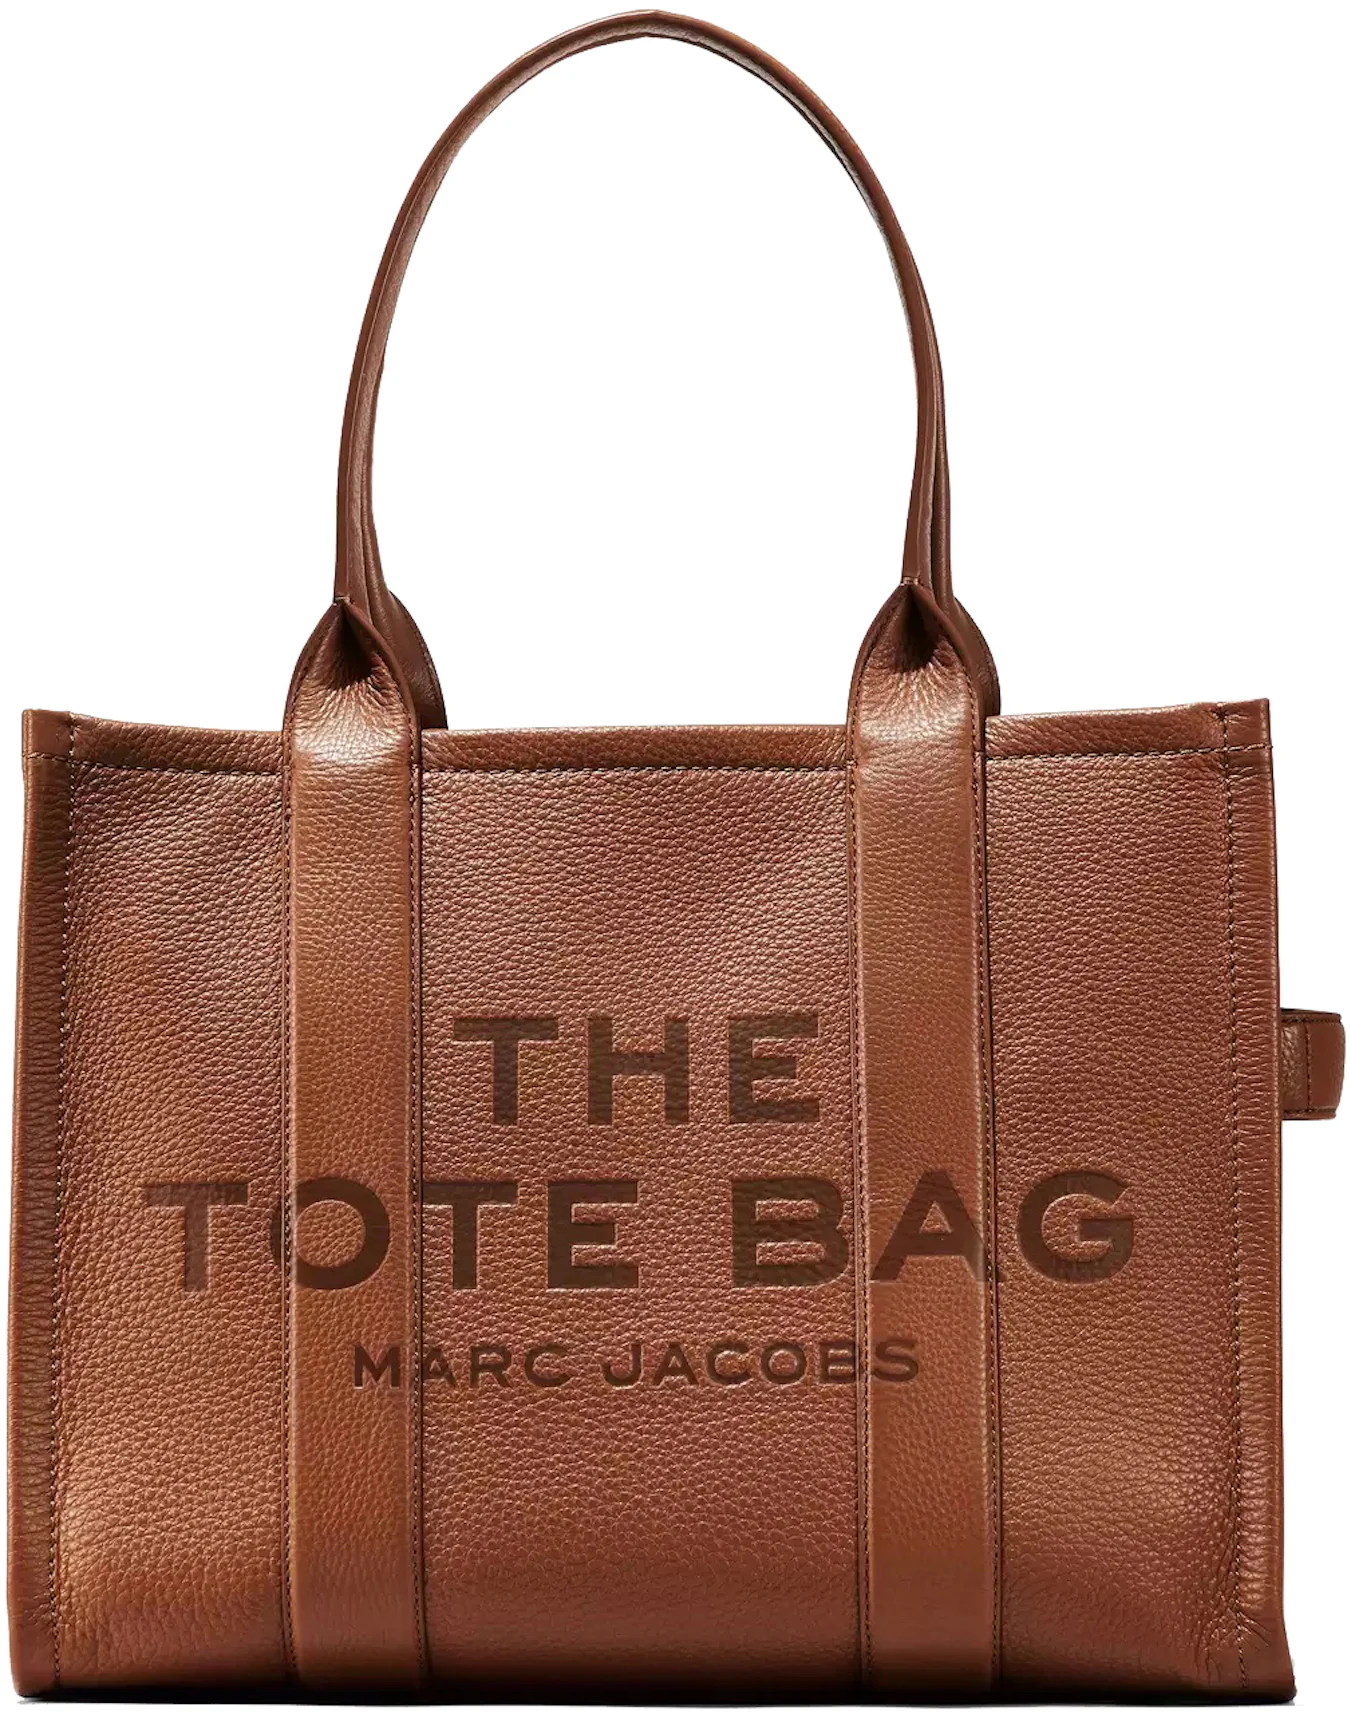  Marc Jacobs Women's The Leather Medium Tote Bag, Argan Oil,  Brown, One Size : Clothing, Shoes & Jewelry